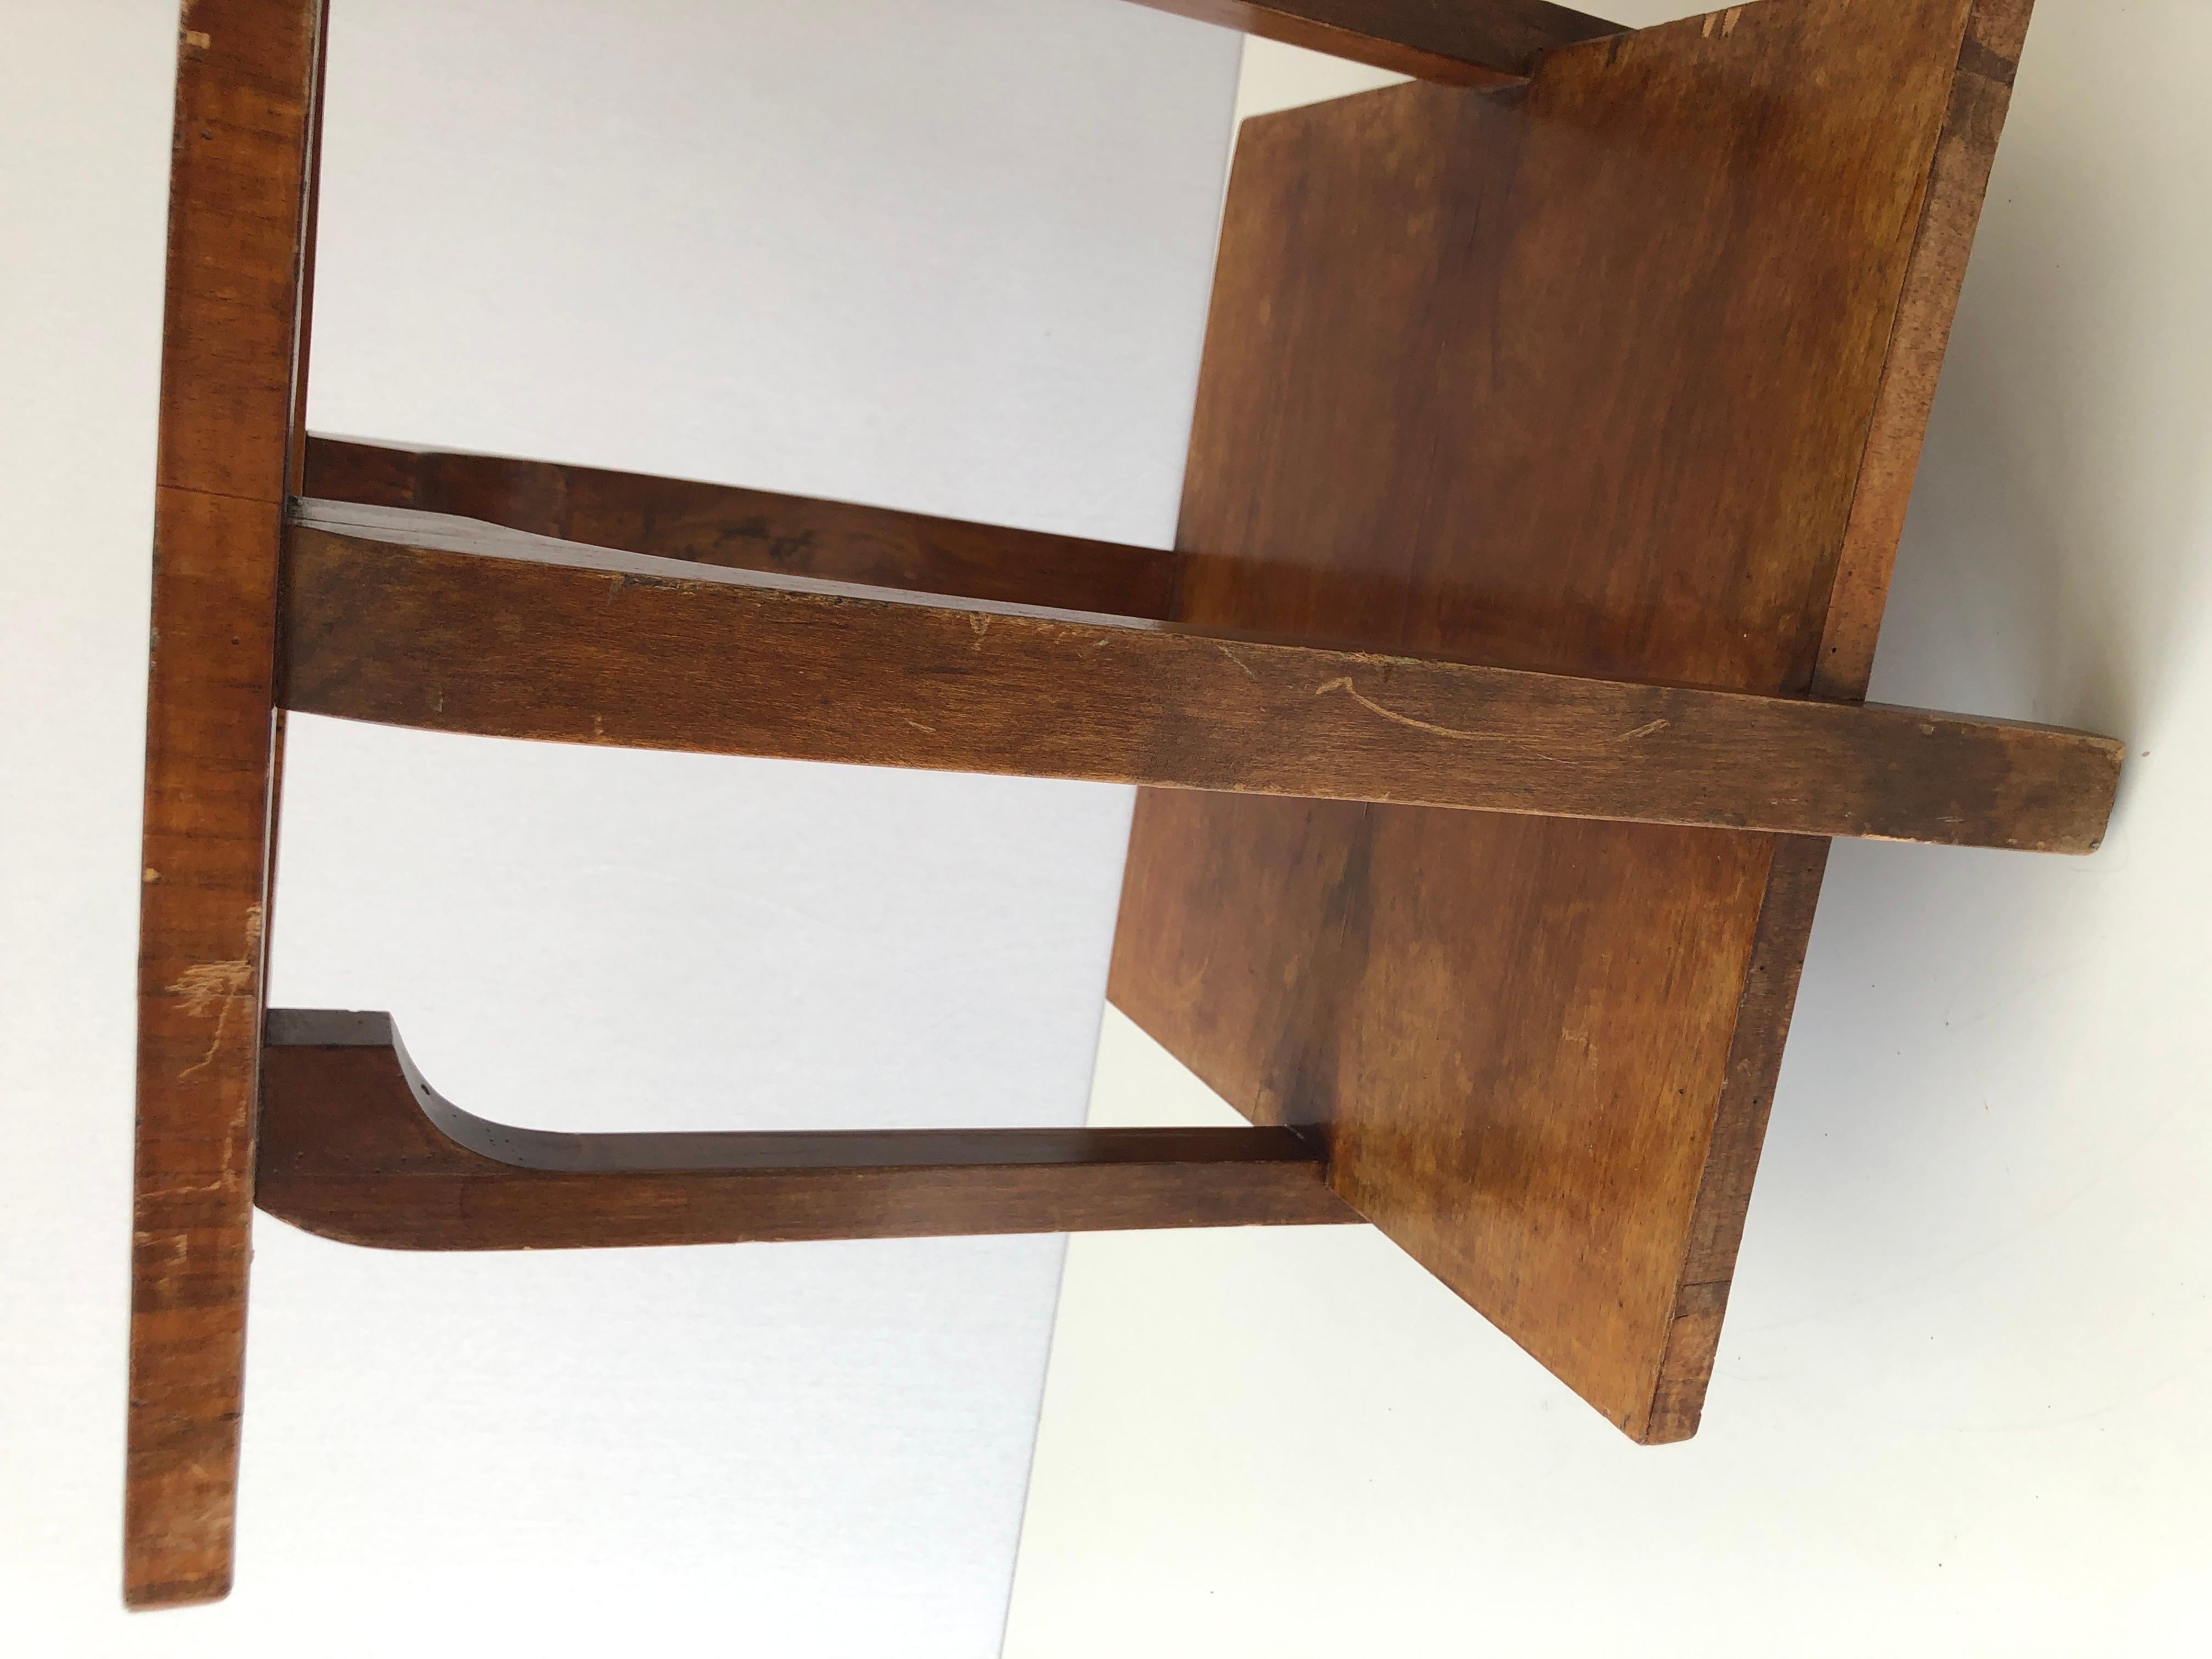 Art Deco Square Wood Corner or End Table, 1940s, Made in Italy For Sale 6